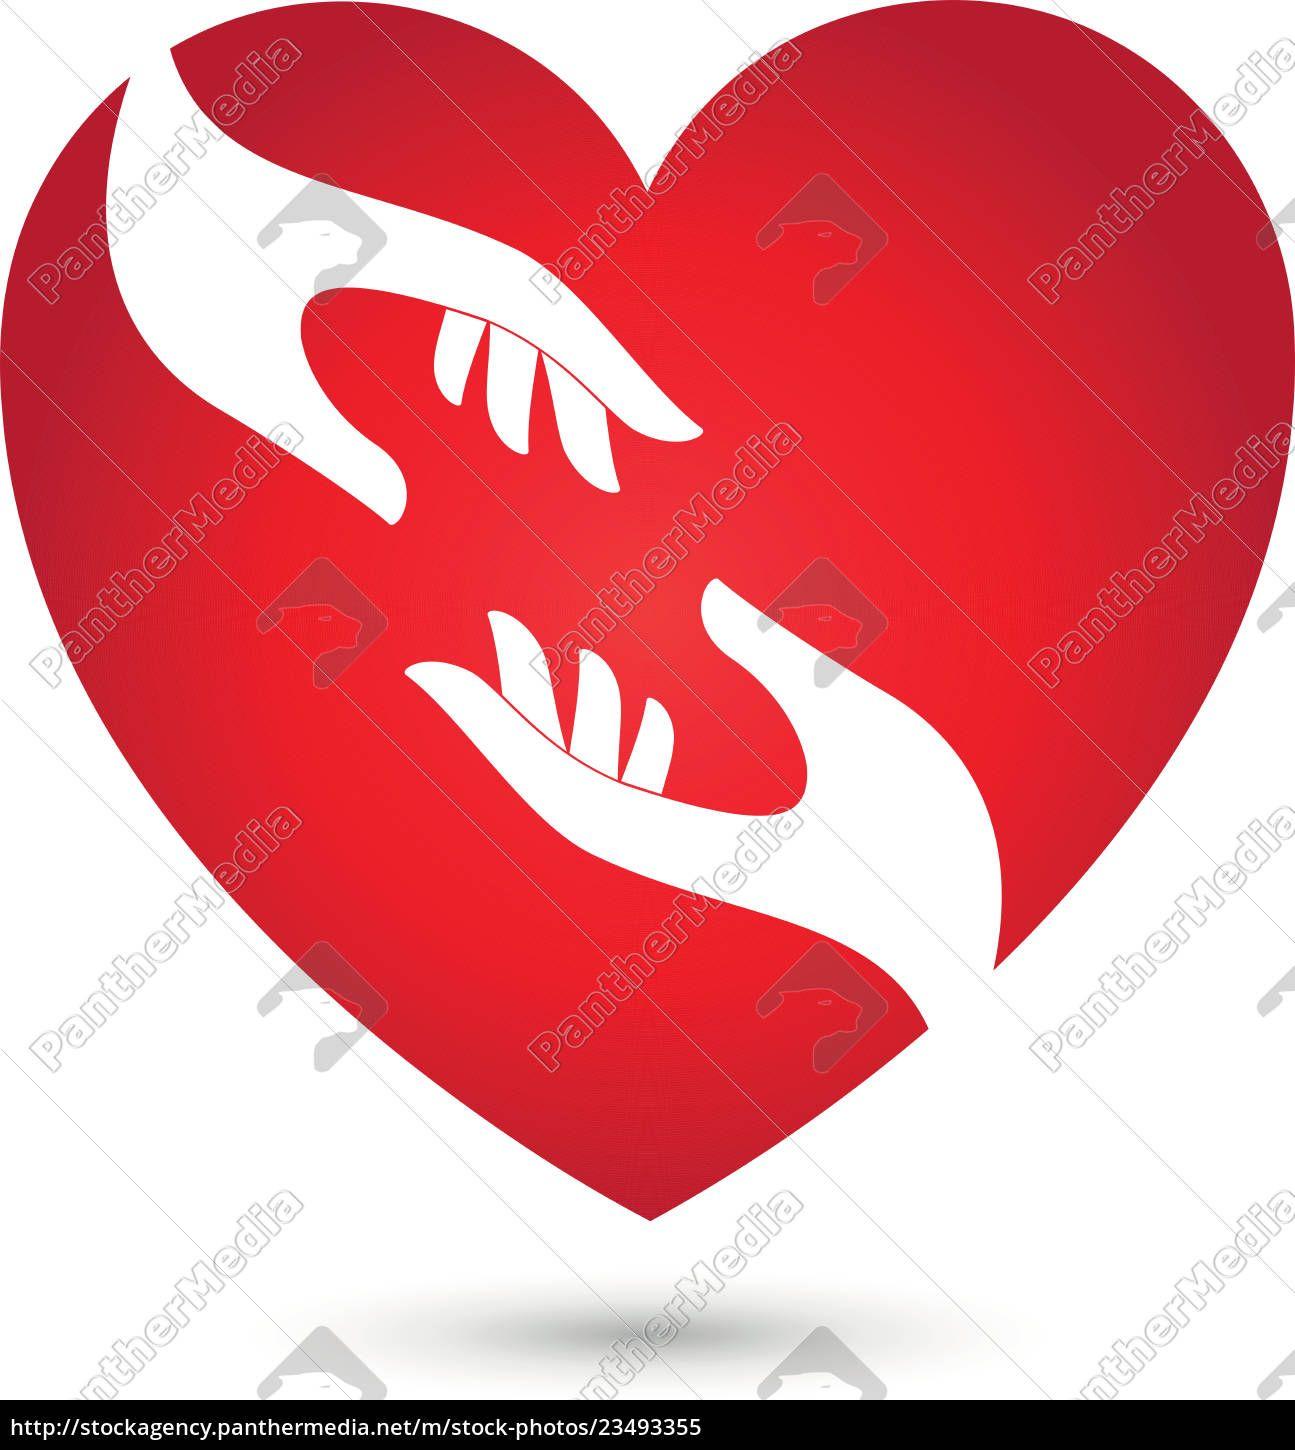 Heart with Hands Logo - heart and hands,heart,hands,logo - Stock Photo - #23493355 ...